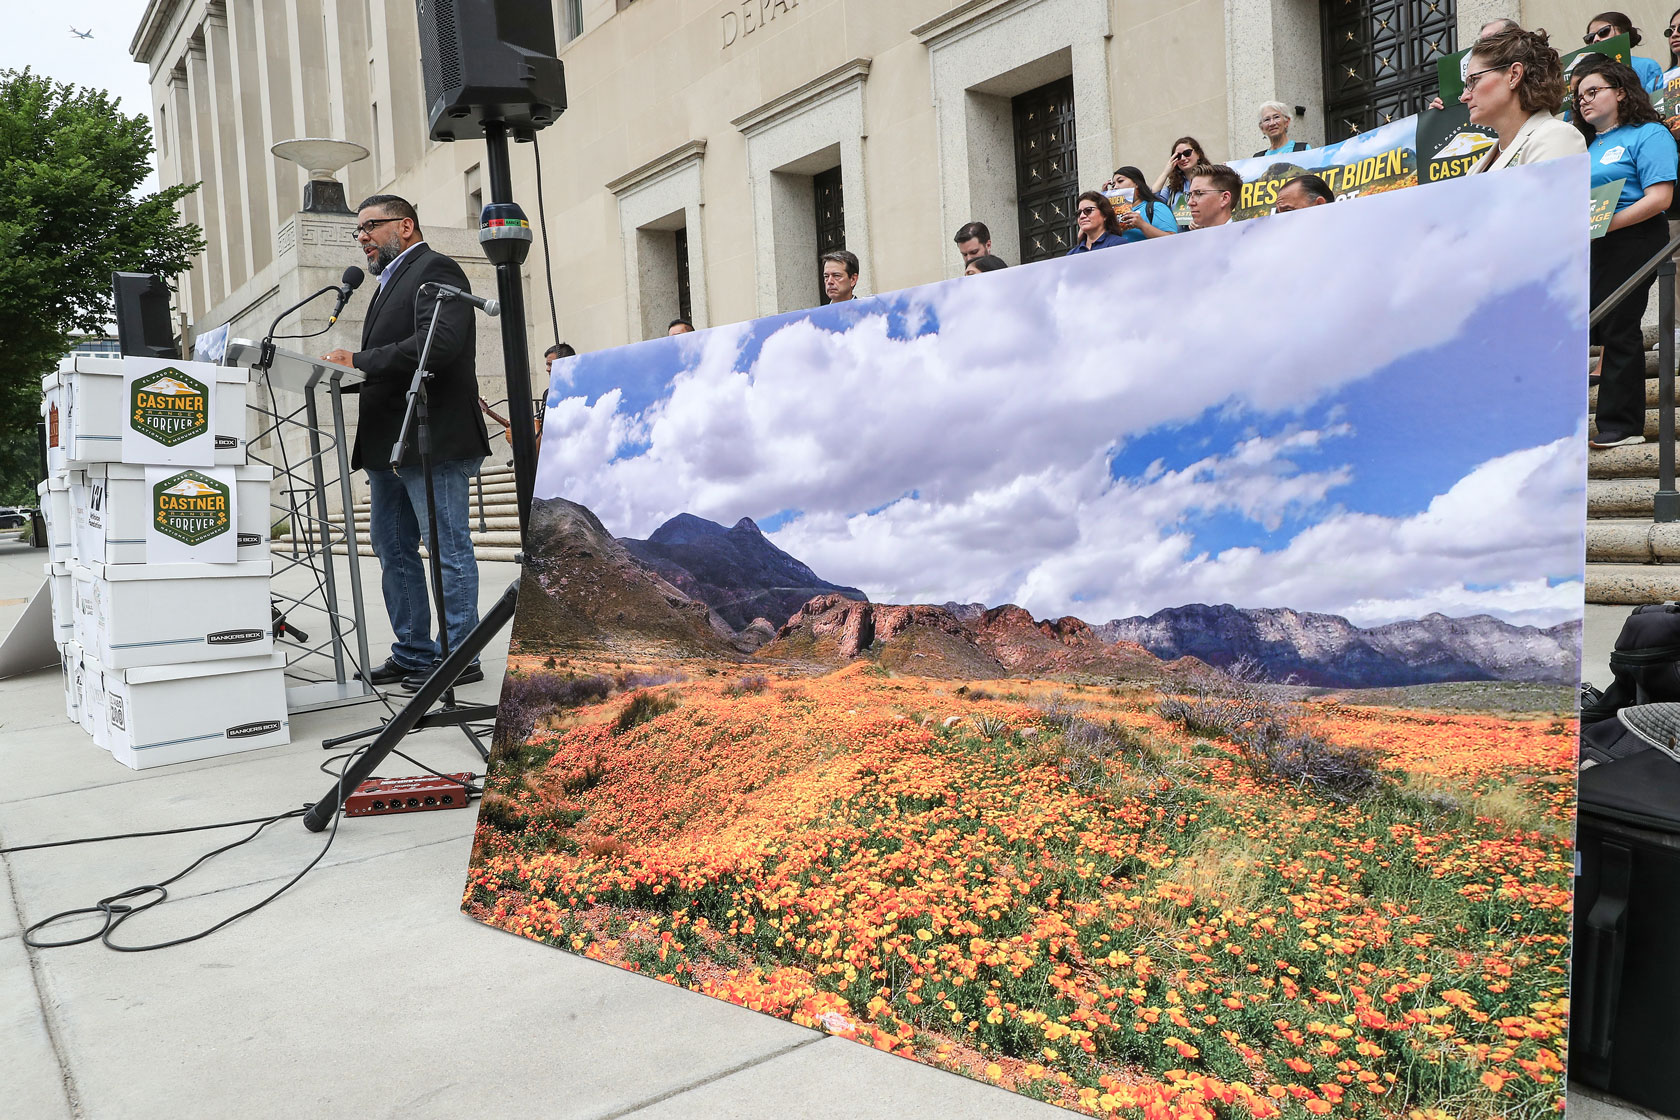 Image showing a man speaking in front of the Department of the Interior